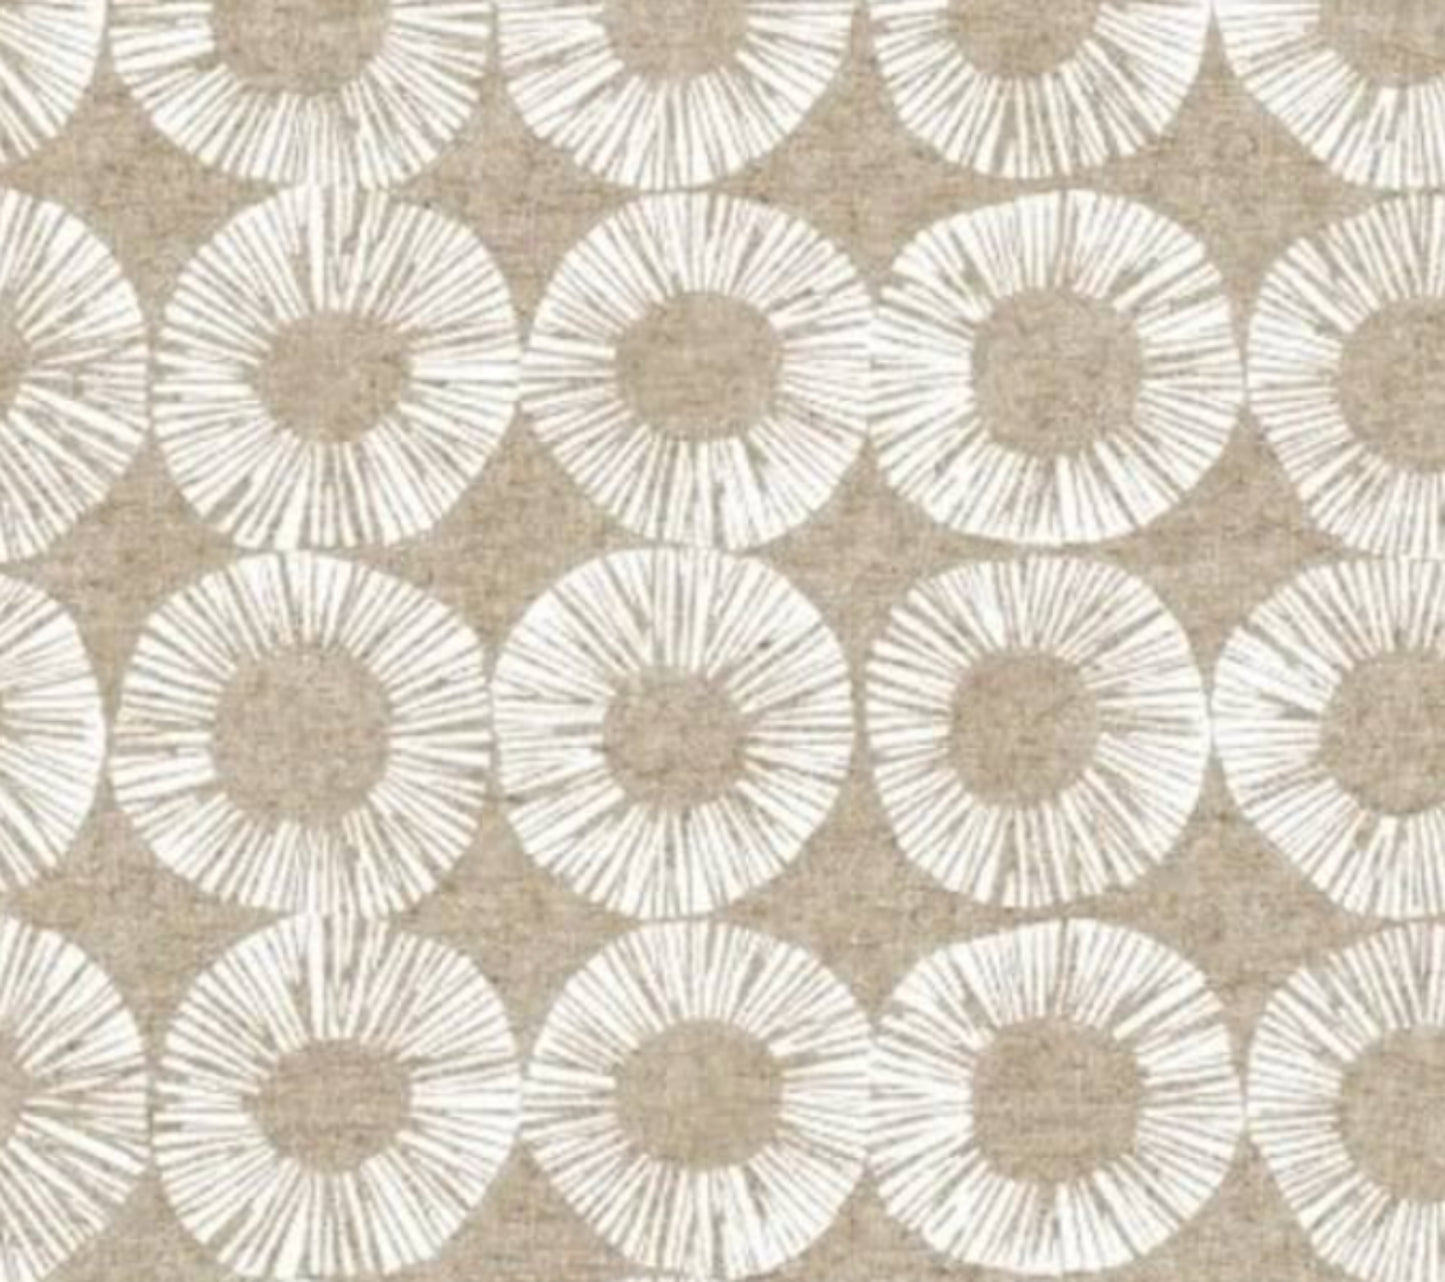 Etched from the Terra Collection by Ghazal Razavi for Figo Fabrics. Linen Cotton Blend 55/45.